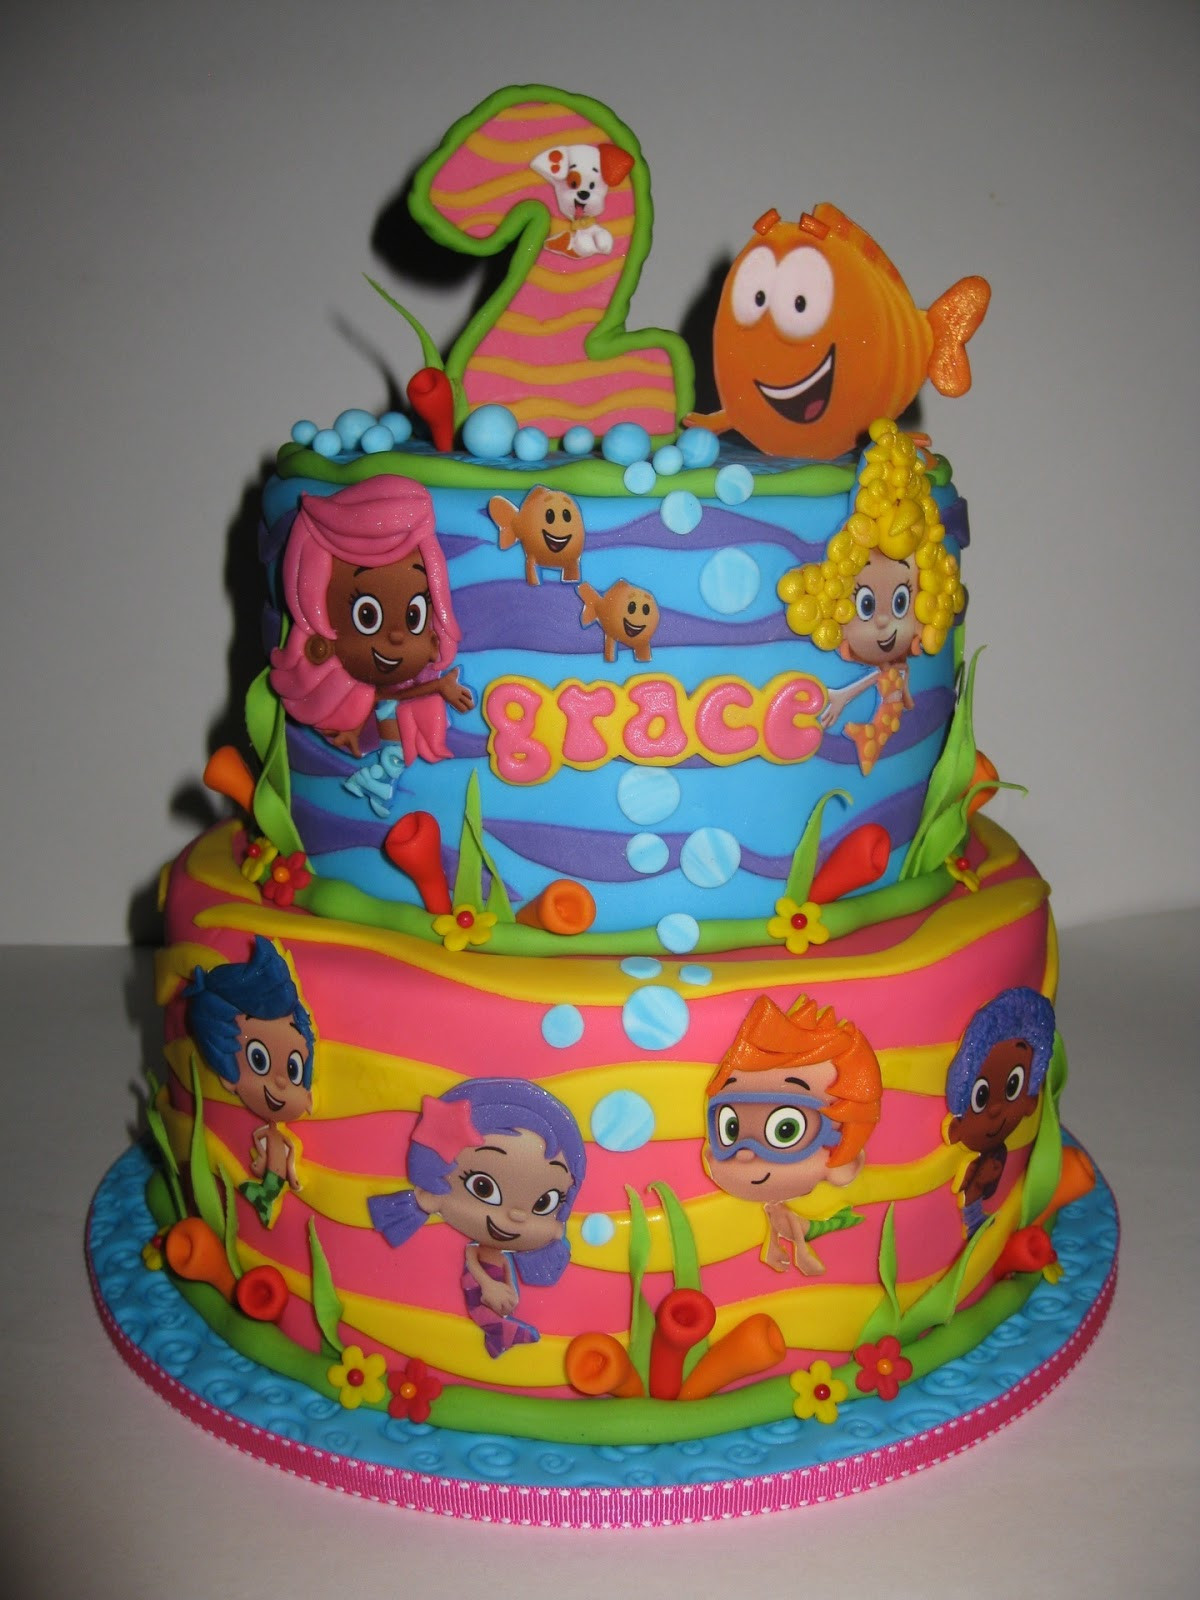 Bubble Guppies Birthday Party Ideas
 Bubble Guppies Birthday Cake Ideas and Inspiration